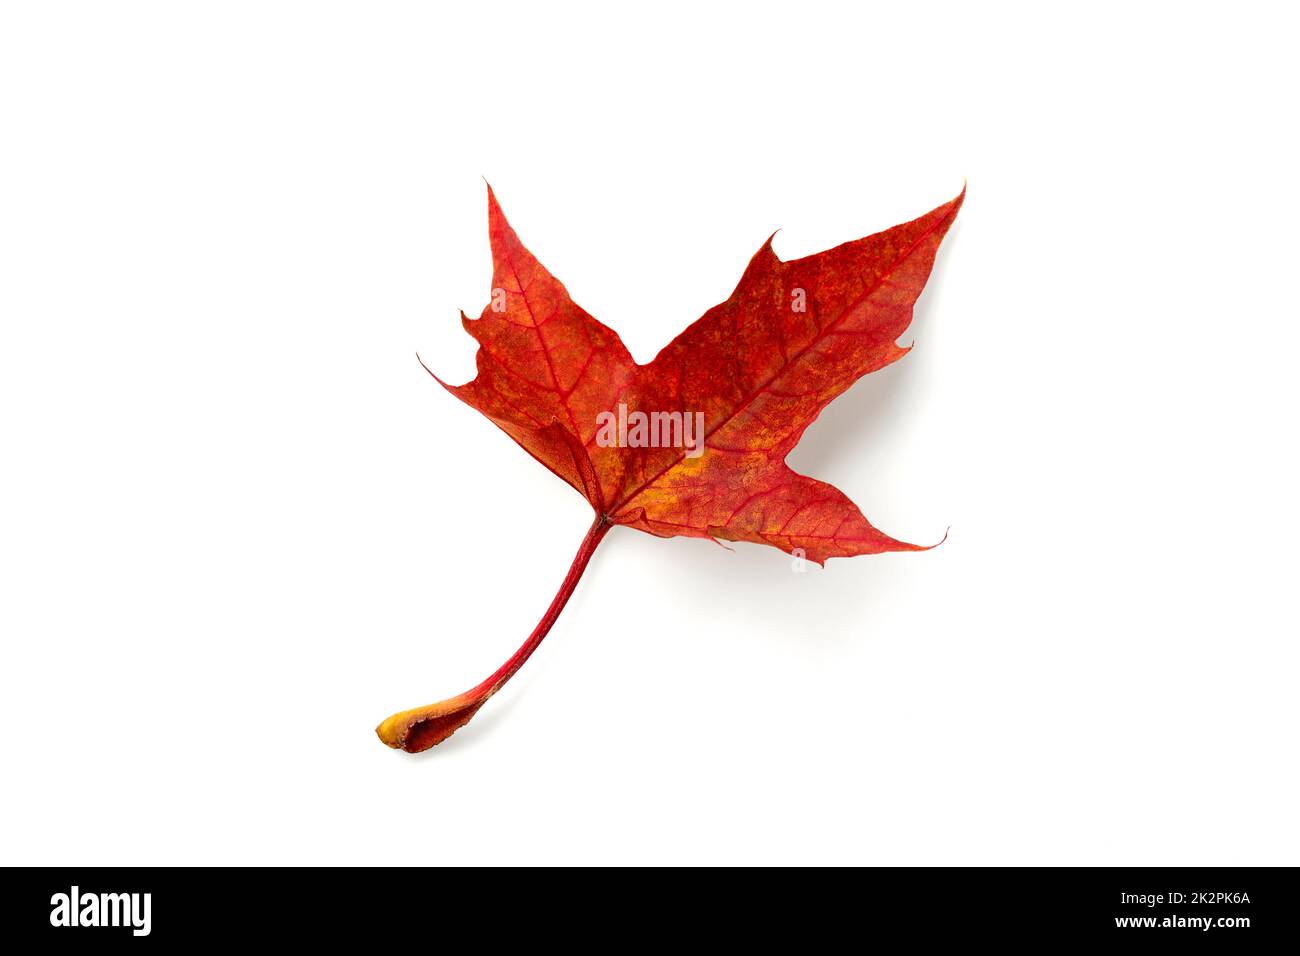 Dry autumn red fallen maple leaf isolated on white background Stock Photo